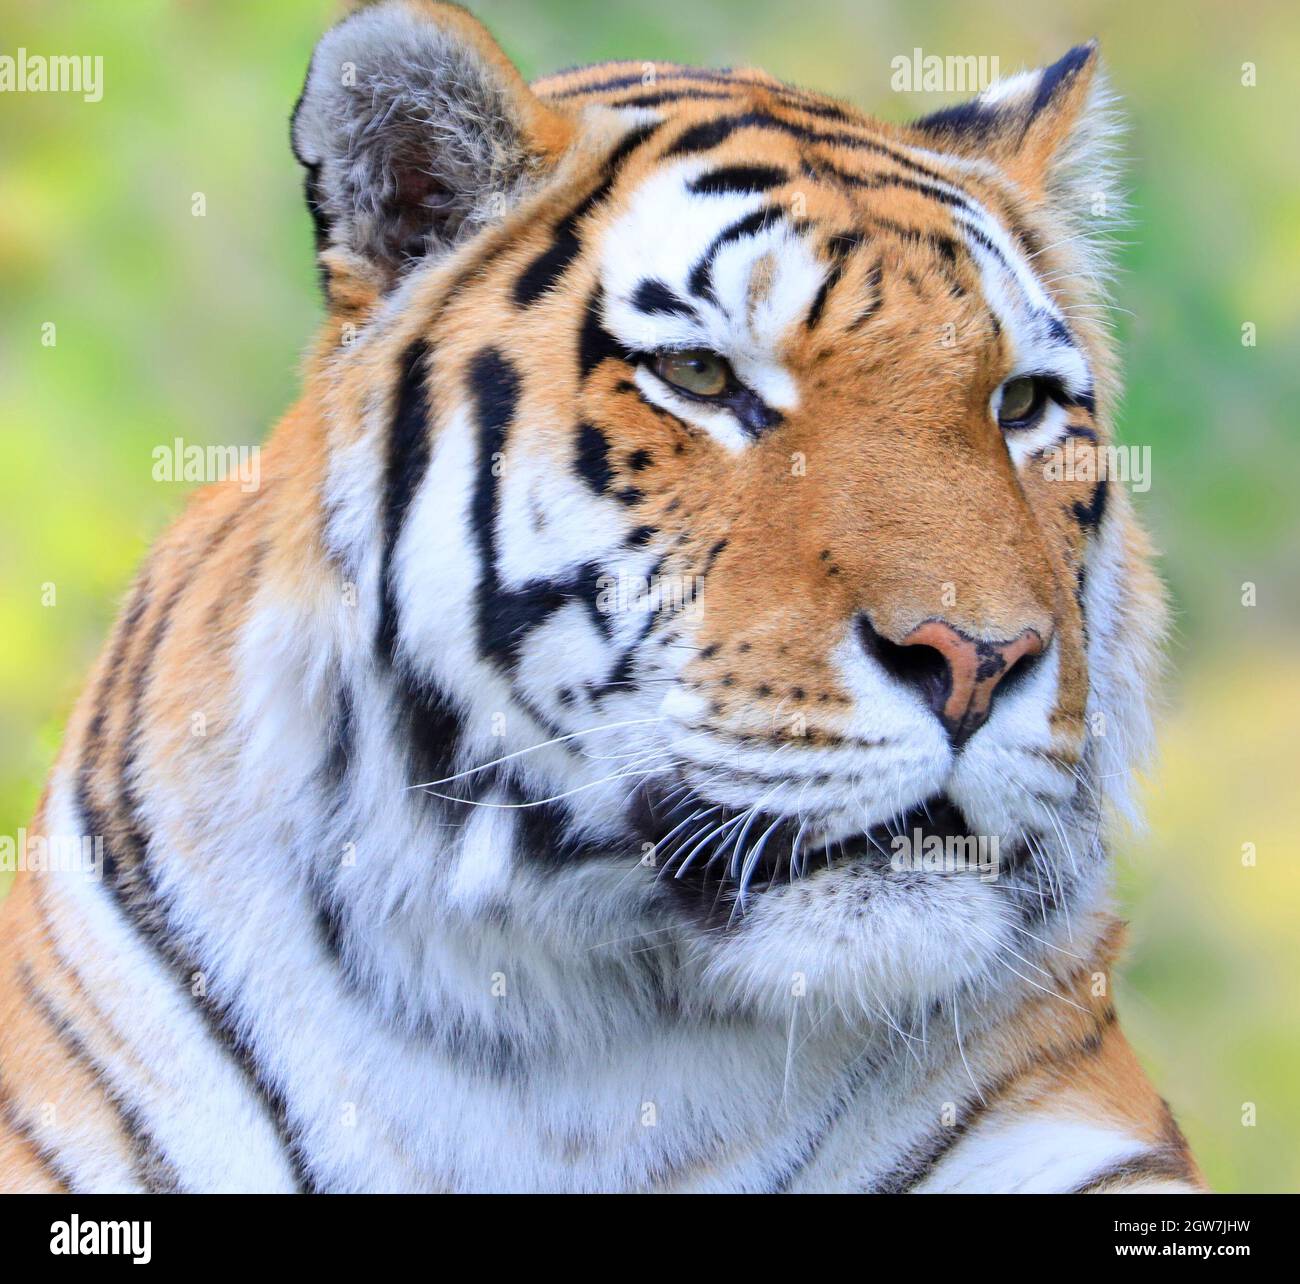 Siberian tiger portrait, also known as the Amur tiger Stock Photo